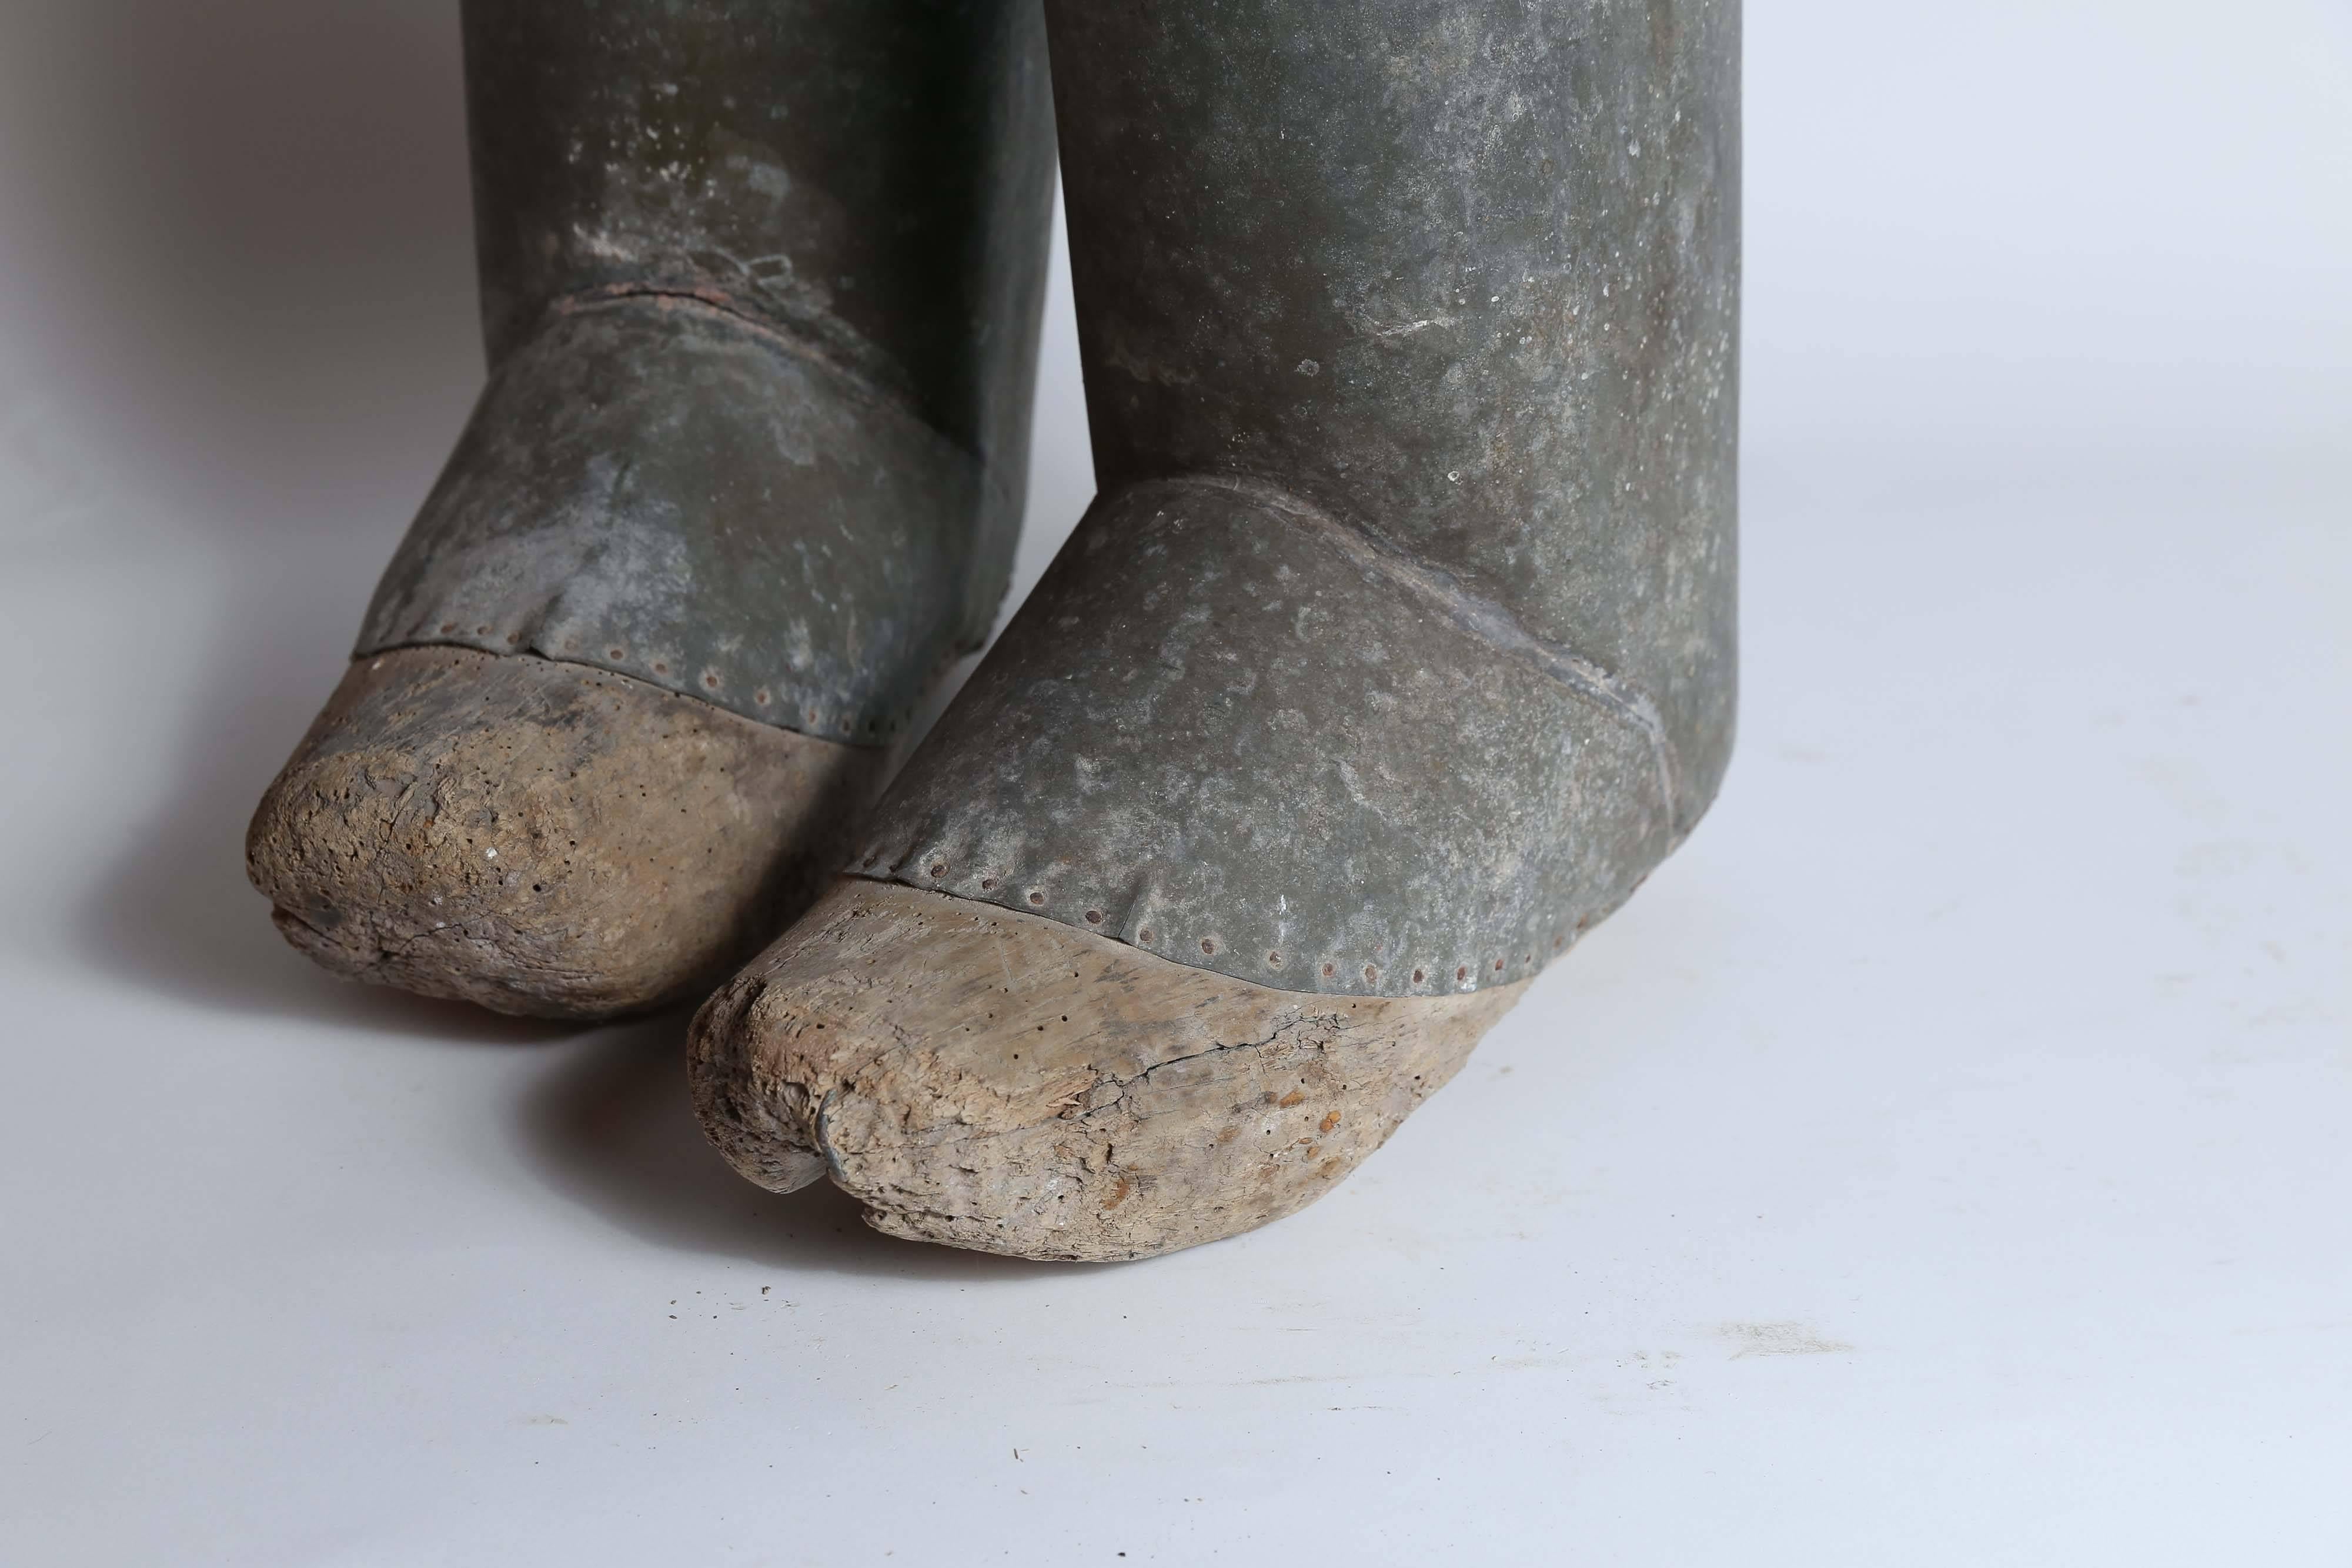 A rare pair of 19th century zinc and wood clog boots found in France. Zinc uppers have been shaped and nailed to the balsa wood clogs. Reputedly used by eel fishermen to protect the lower portion of their legs while spearing eels. The balsa bottoms